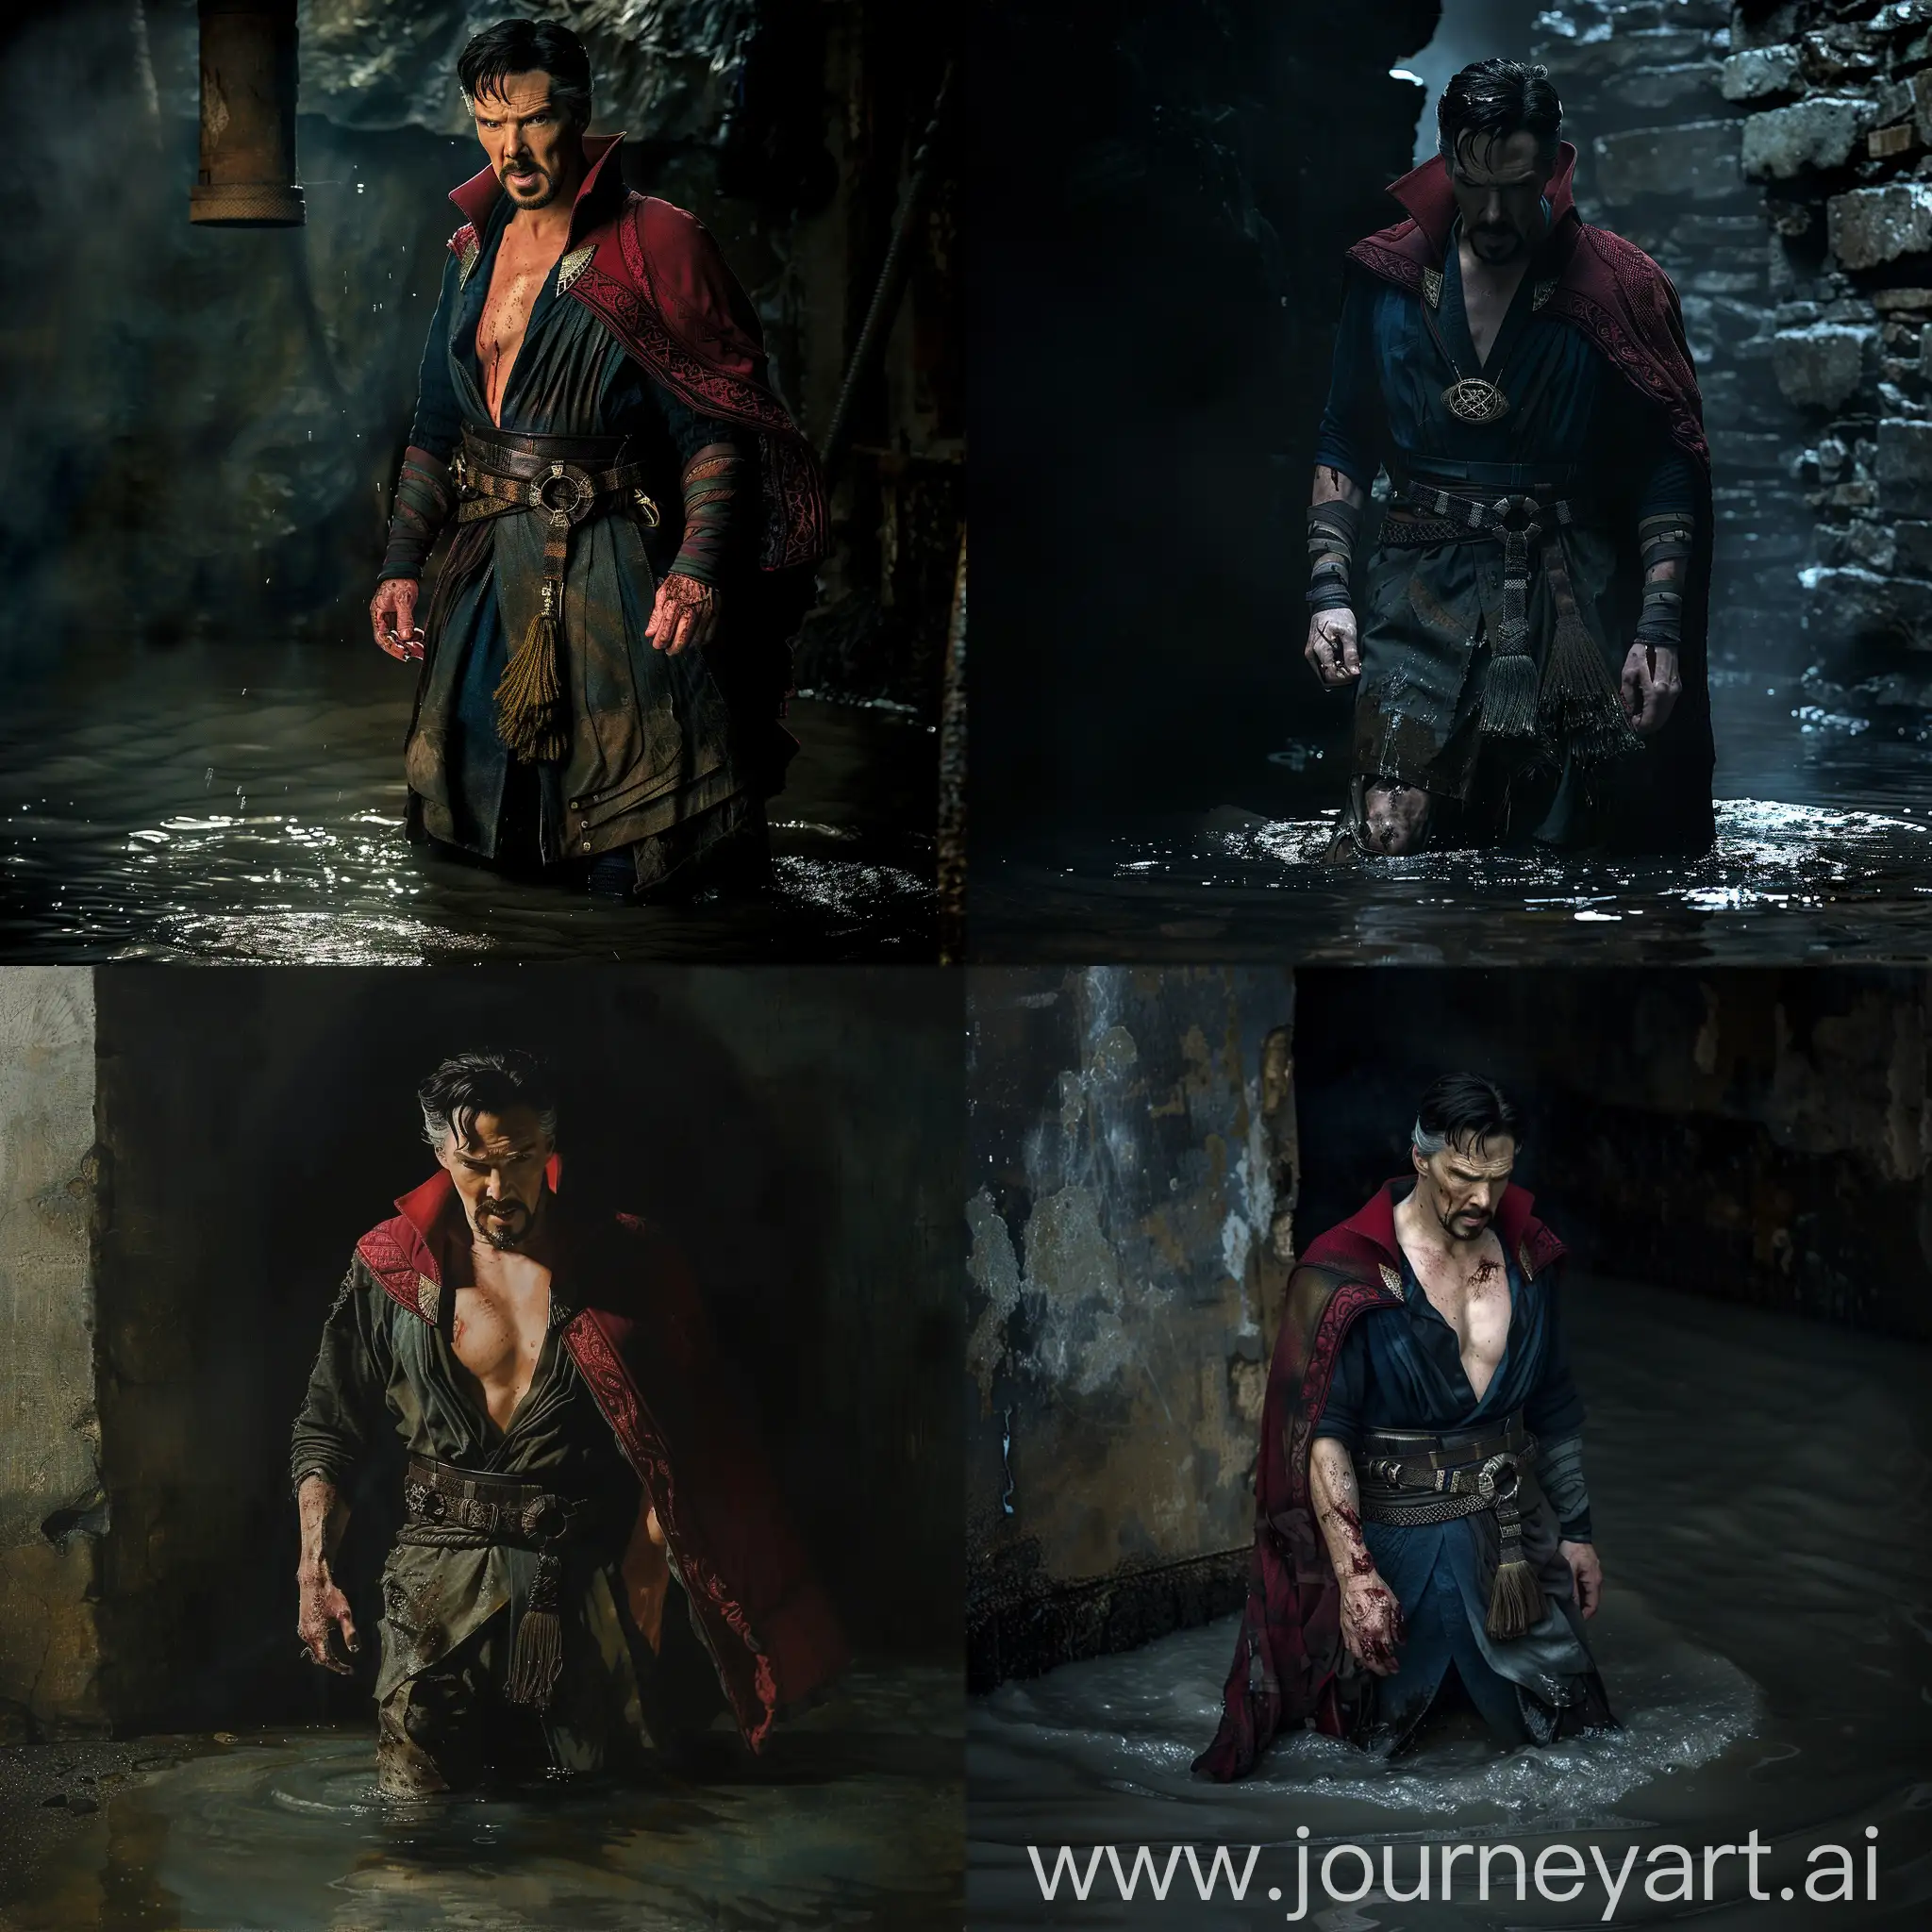 Shirtless-Doctor-Strange-in-Tattered-Attire-Confronts-Rising-Water-in-Dimly-Lit-Space